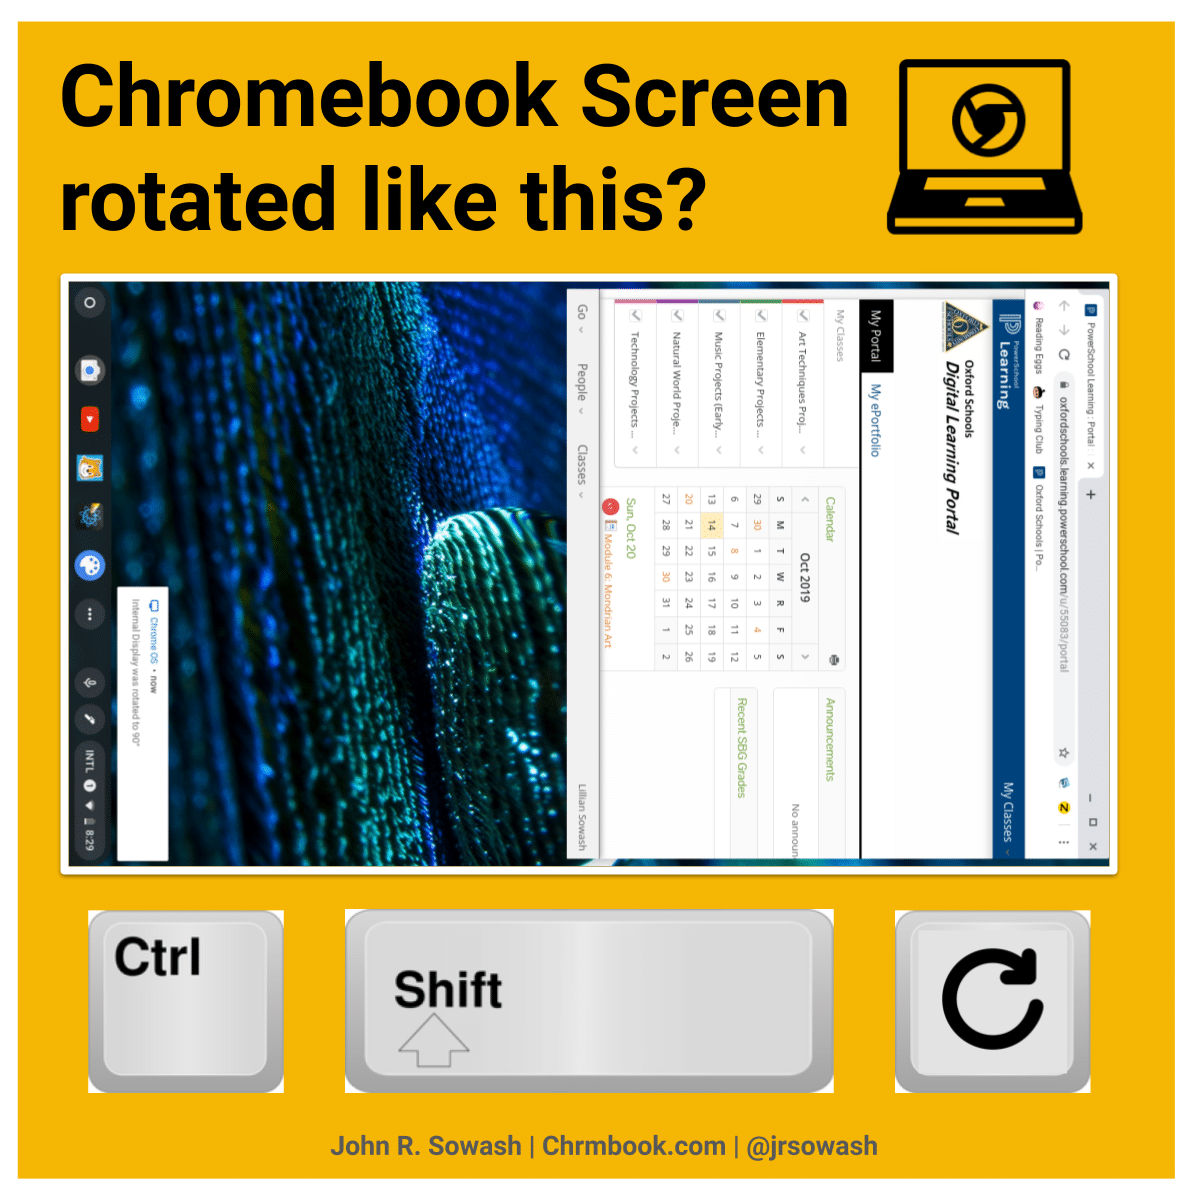 How to rotate your Chromebook Screen